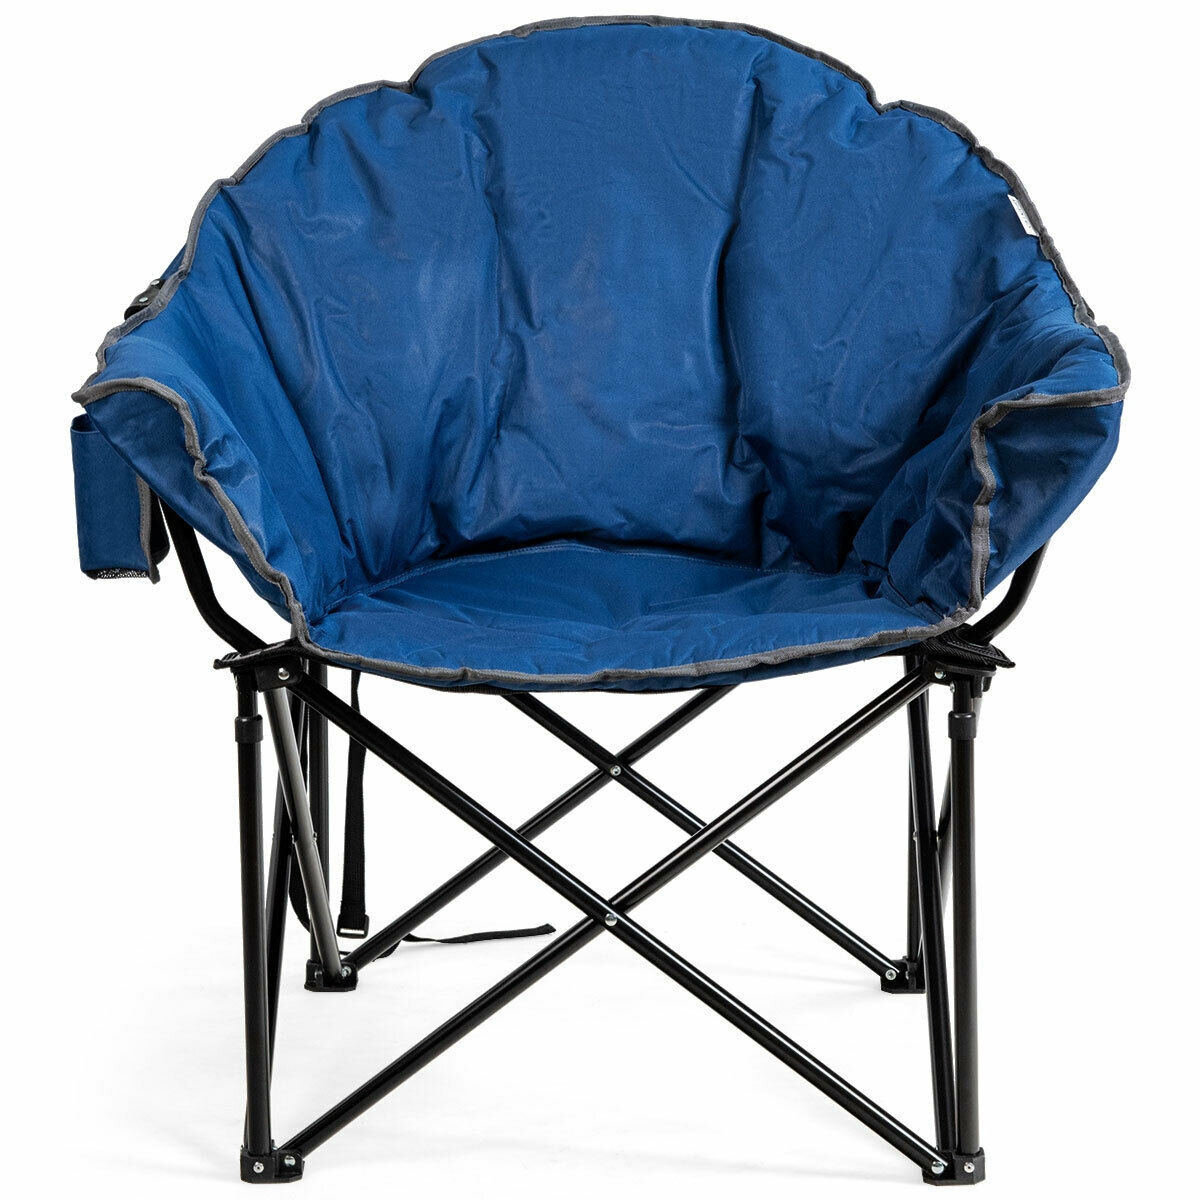 moon chair camping